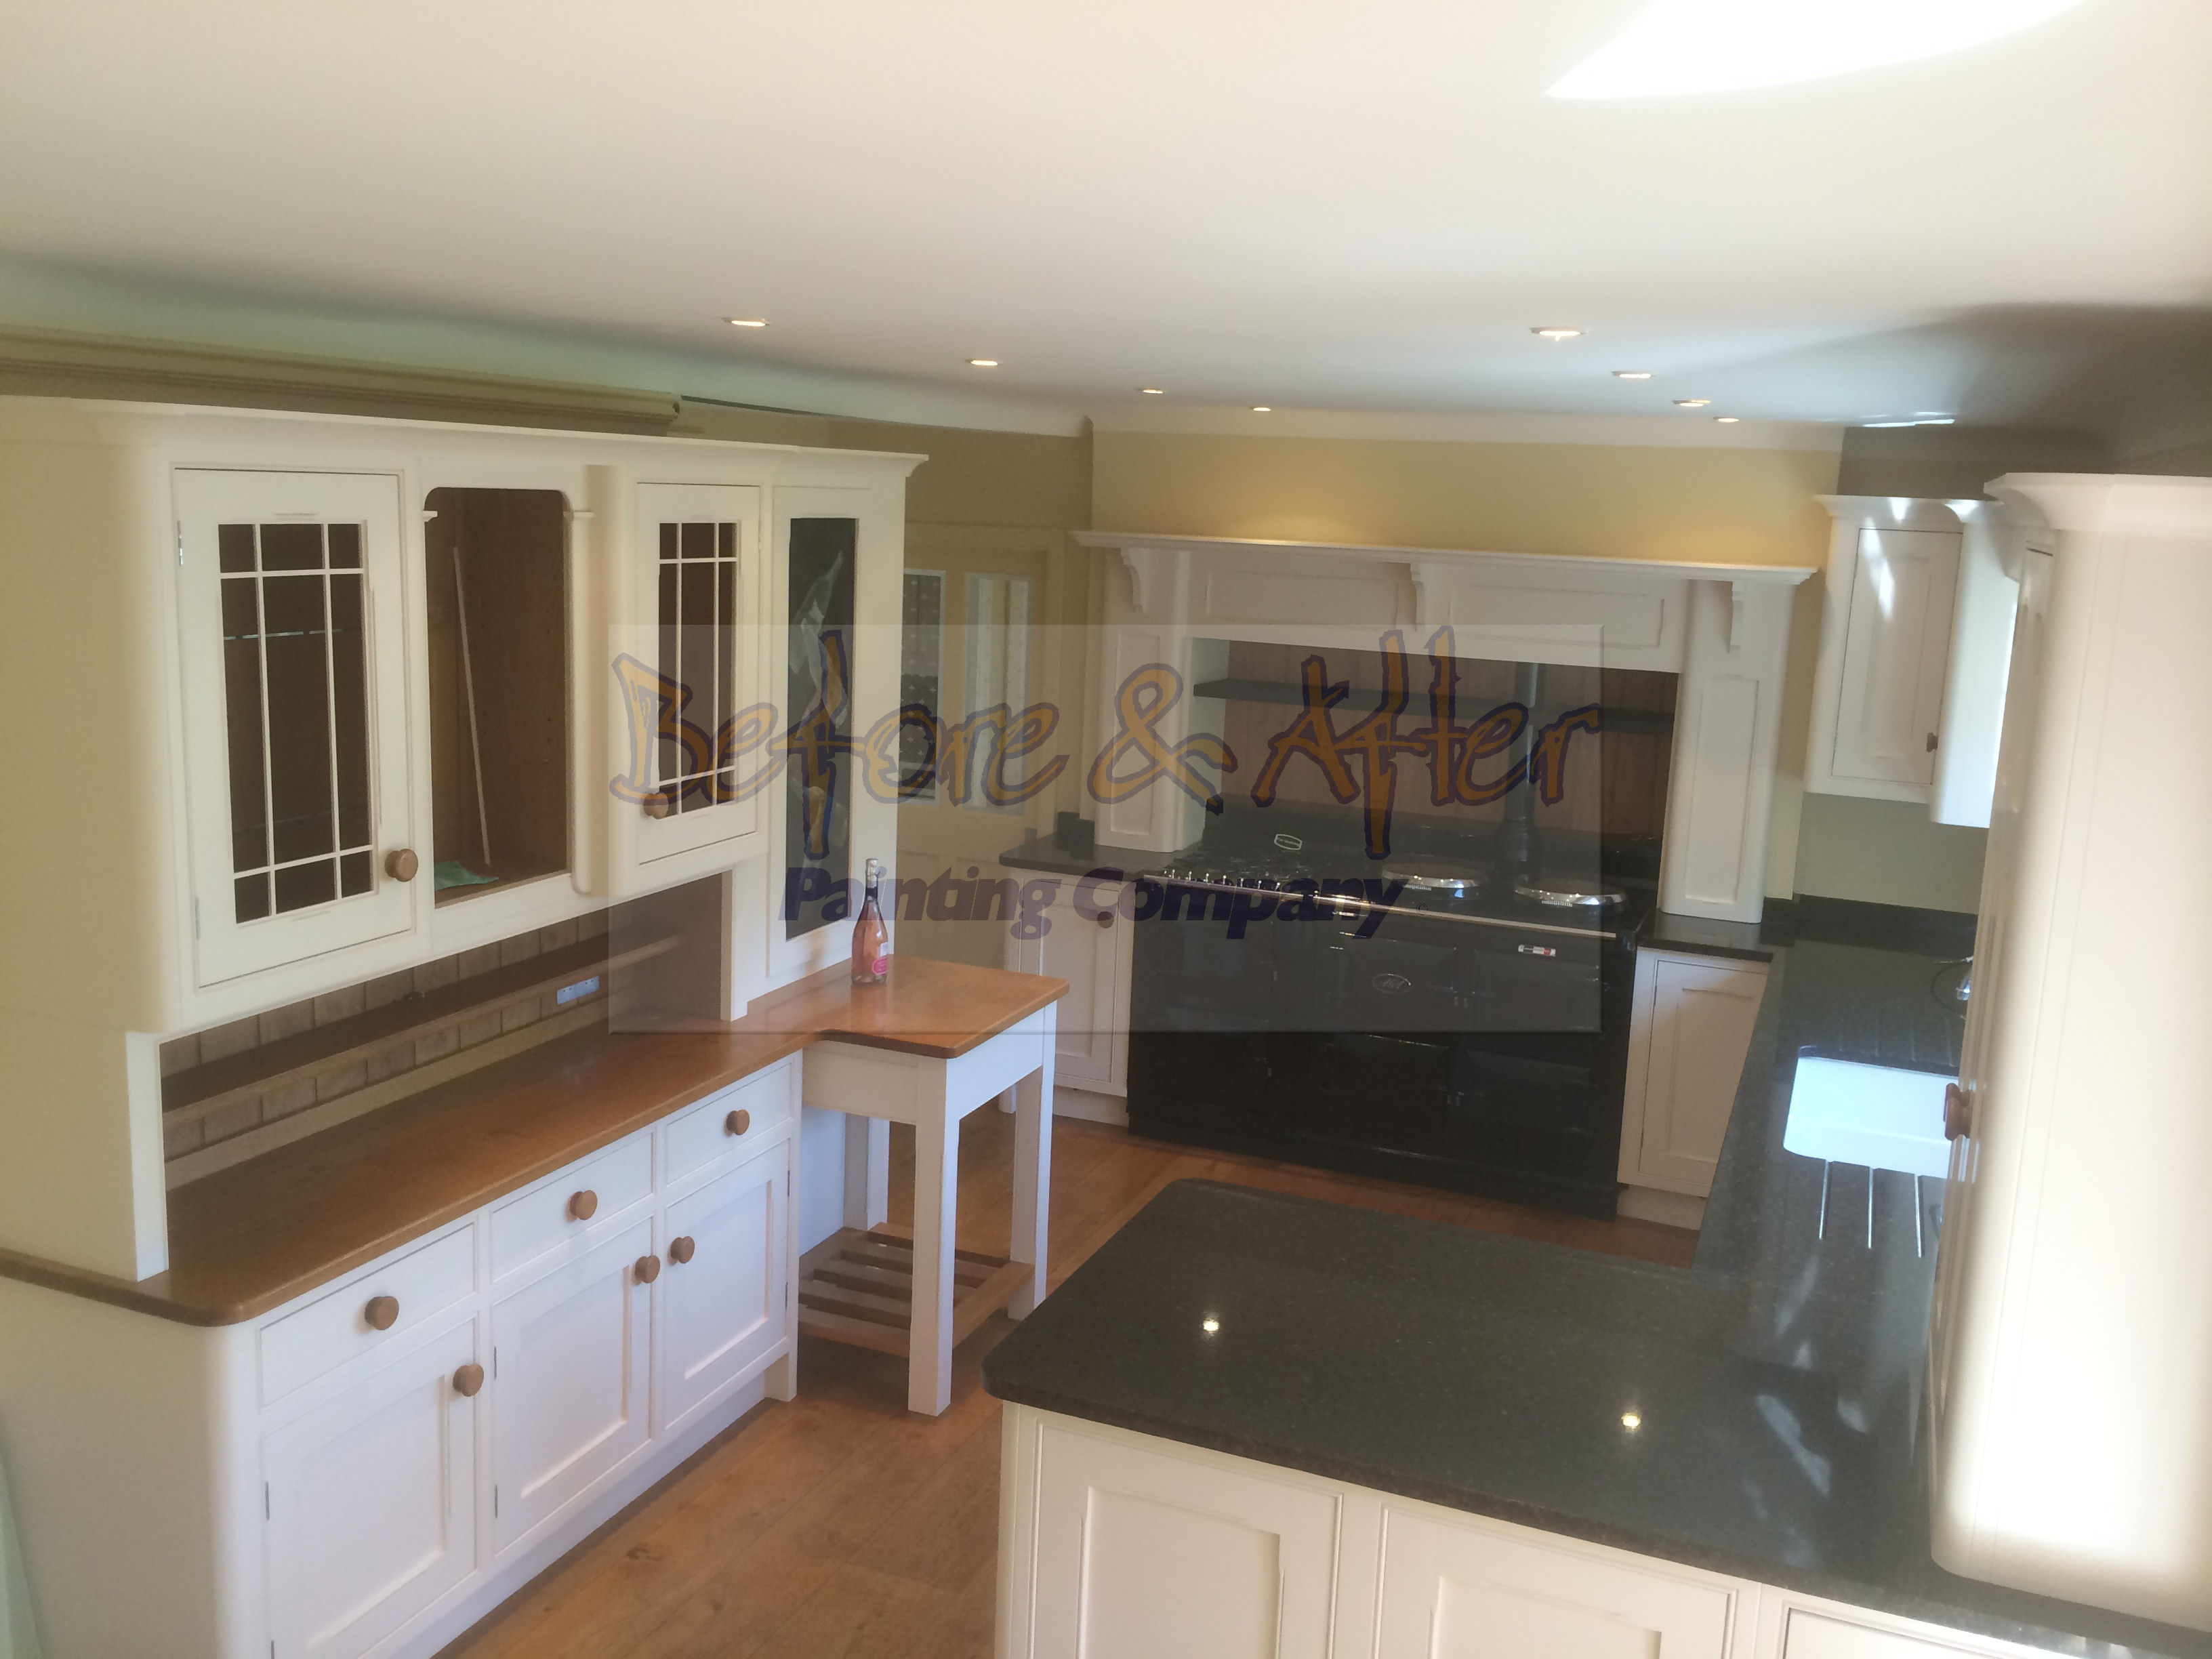 Hand Painted Kitchen in Shorne Kent